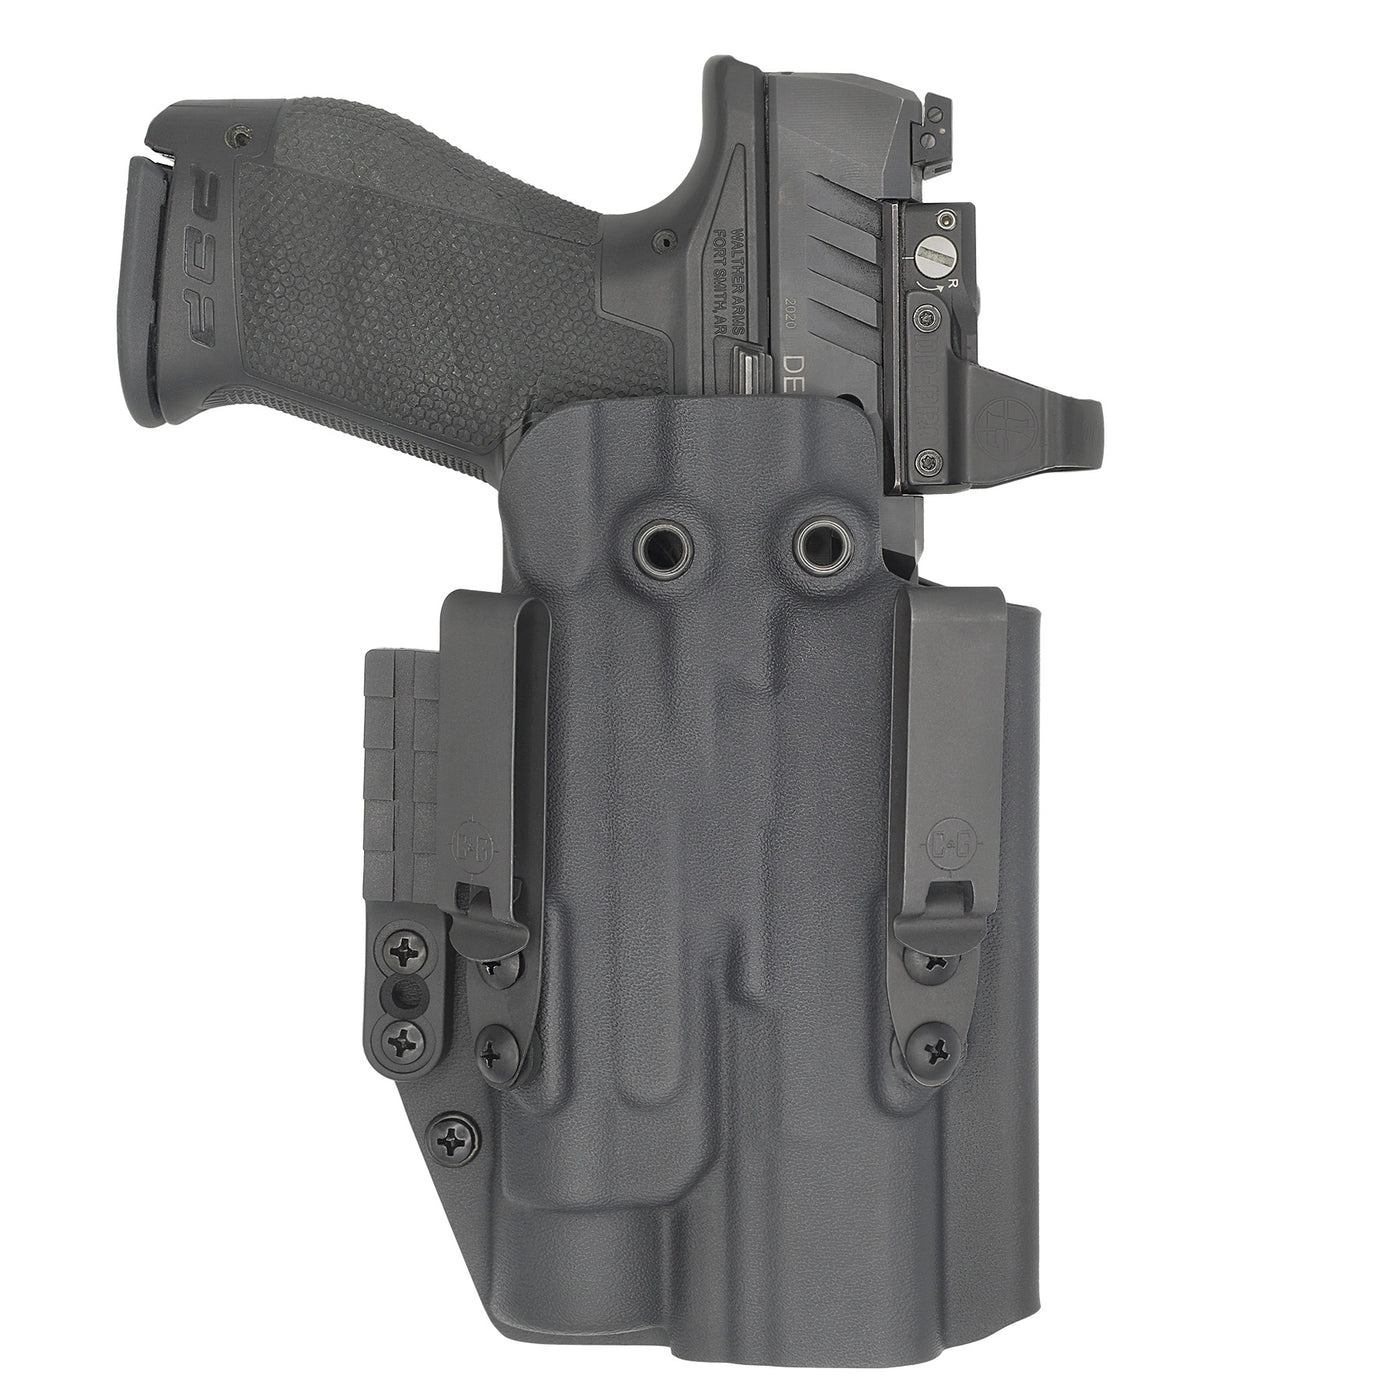 C&G Holsters custom IWB Tactical ALPHA UPGRADE CZ Shadow 2 Streamight TLR1 in holstered position